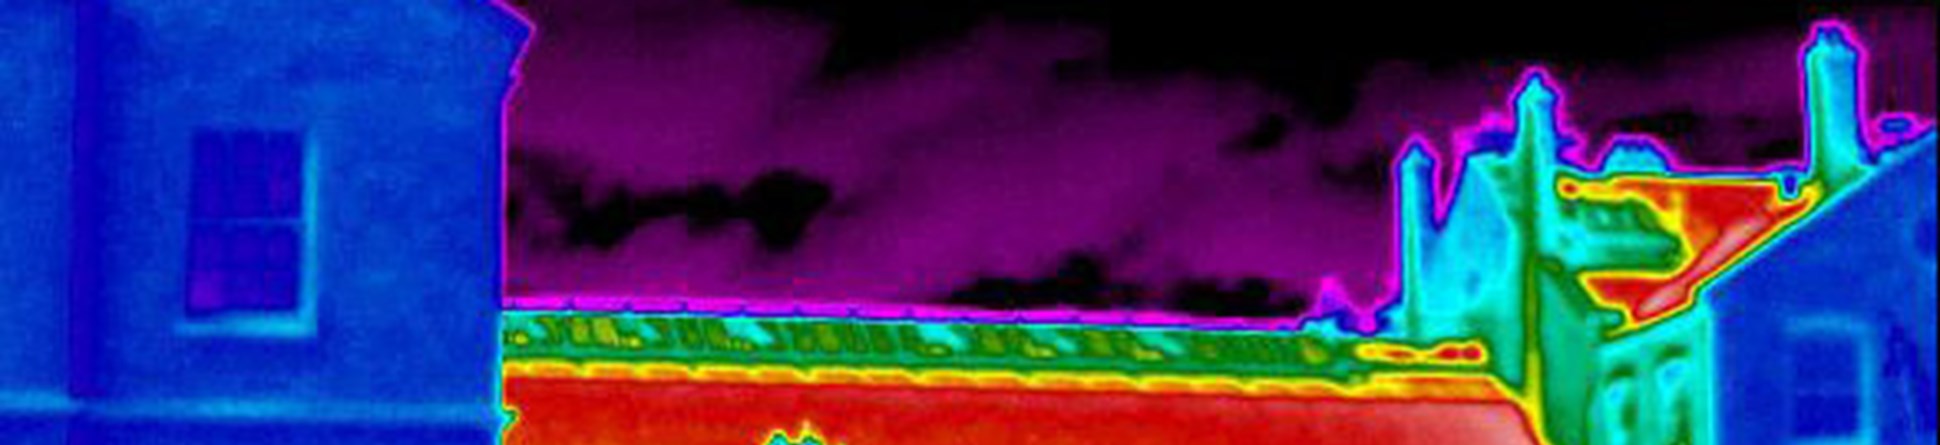 Thermal image of buildings to demonstrate energy heat loss